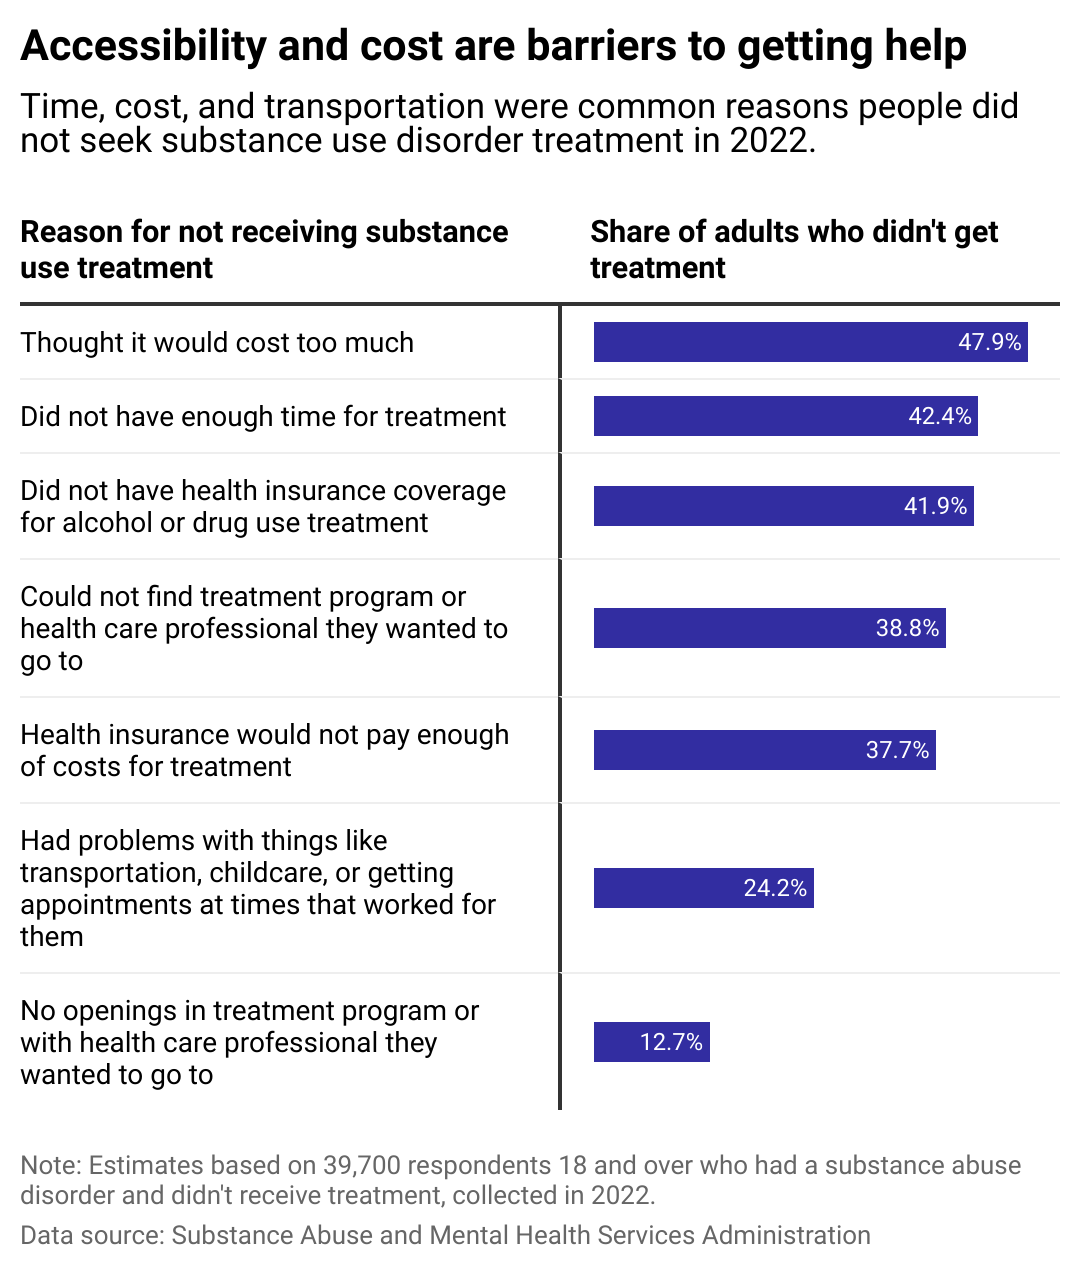 Bar chart showing cost and lack of access reasons for not receiving substance-use disorder treatment.